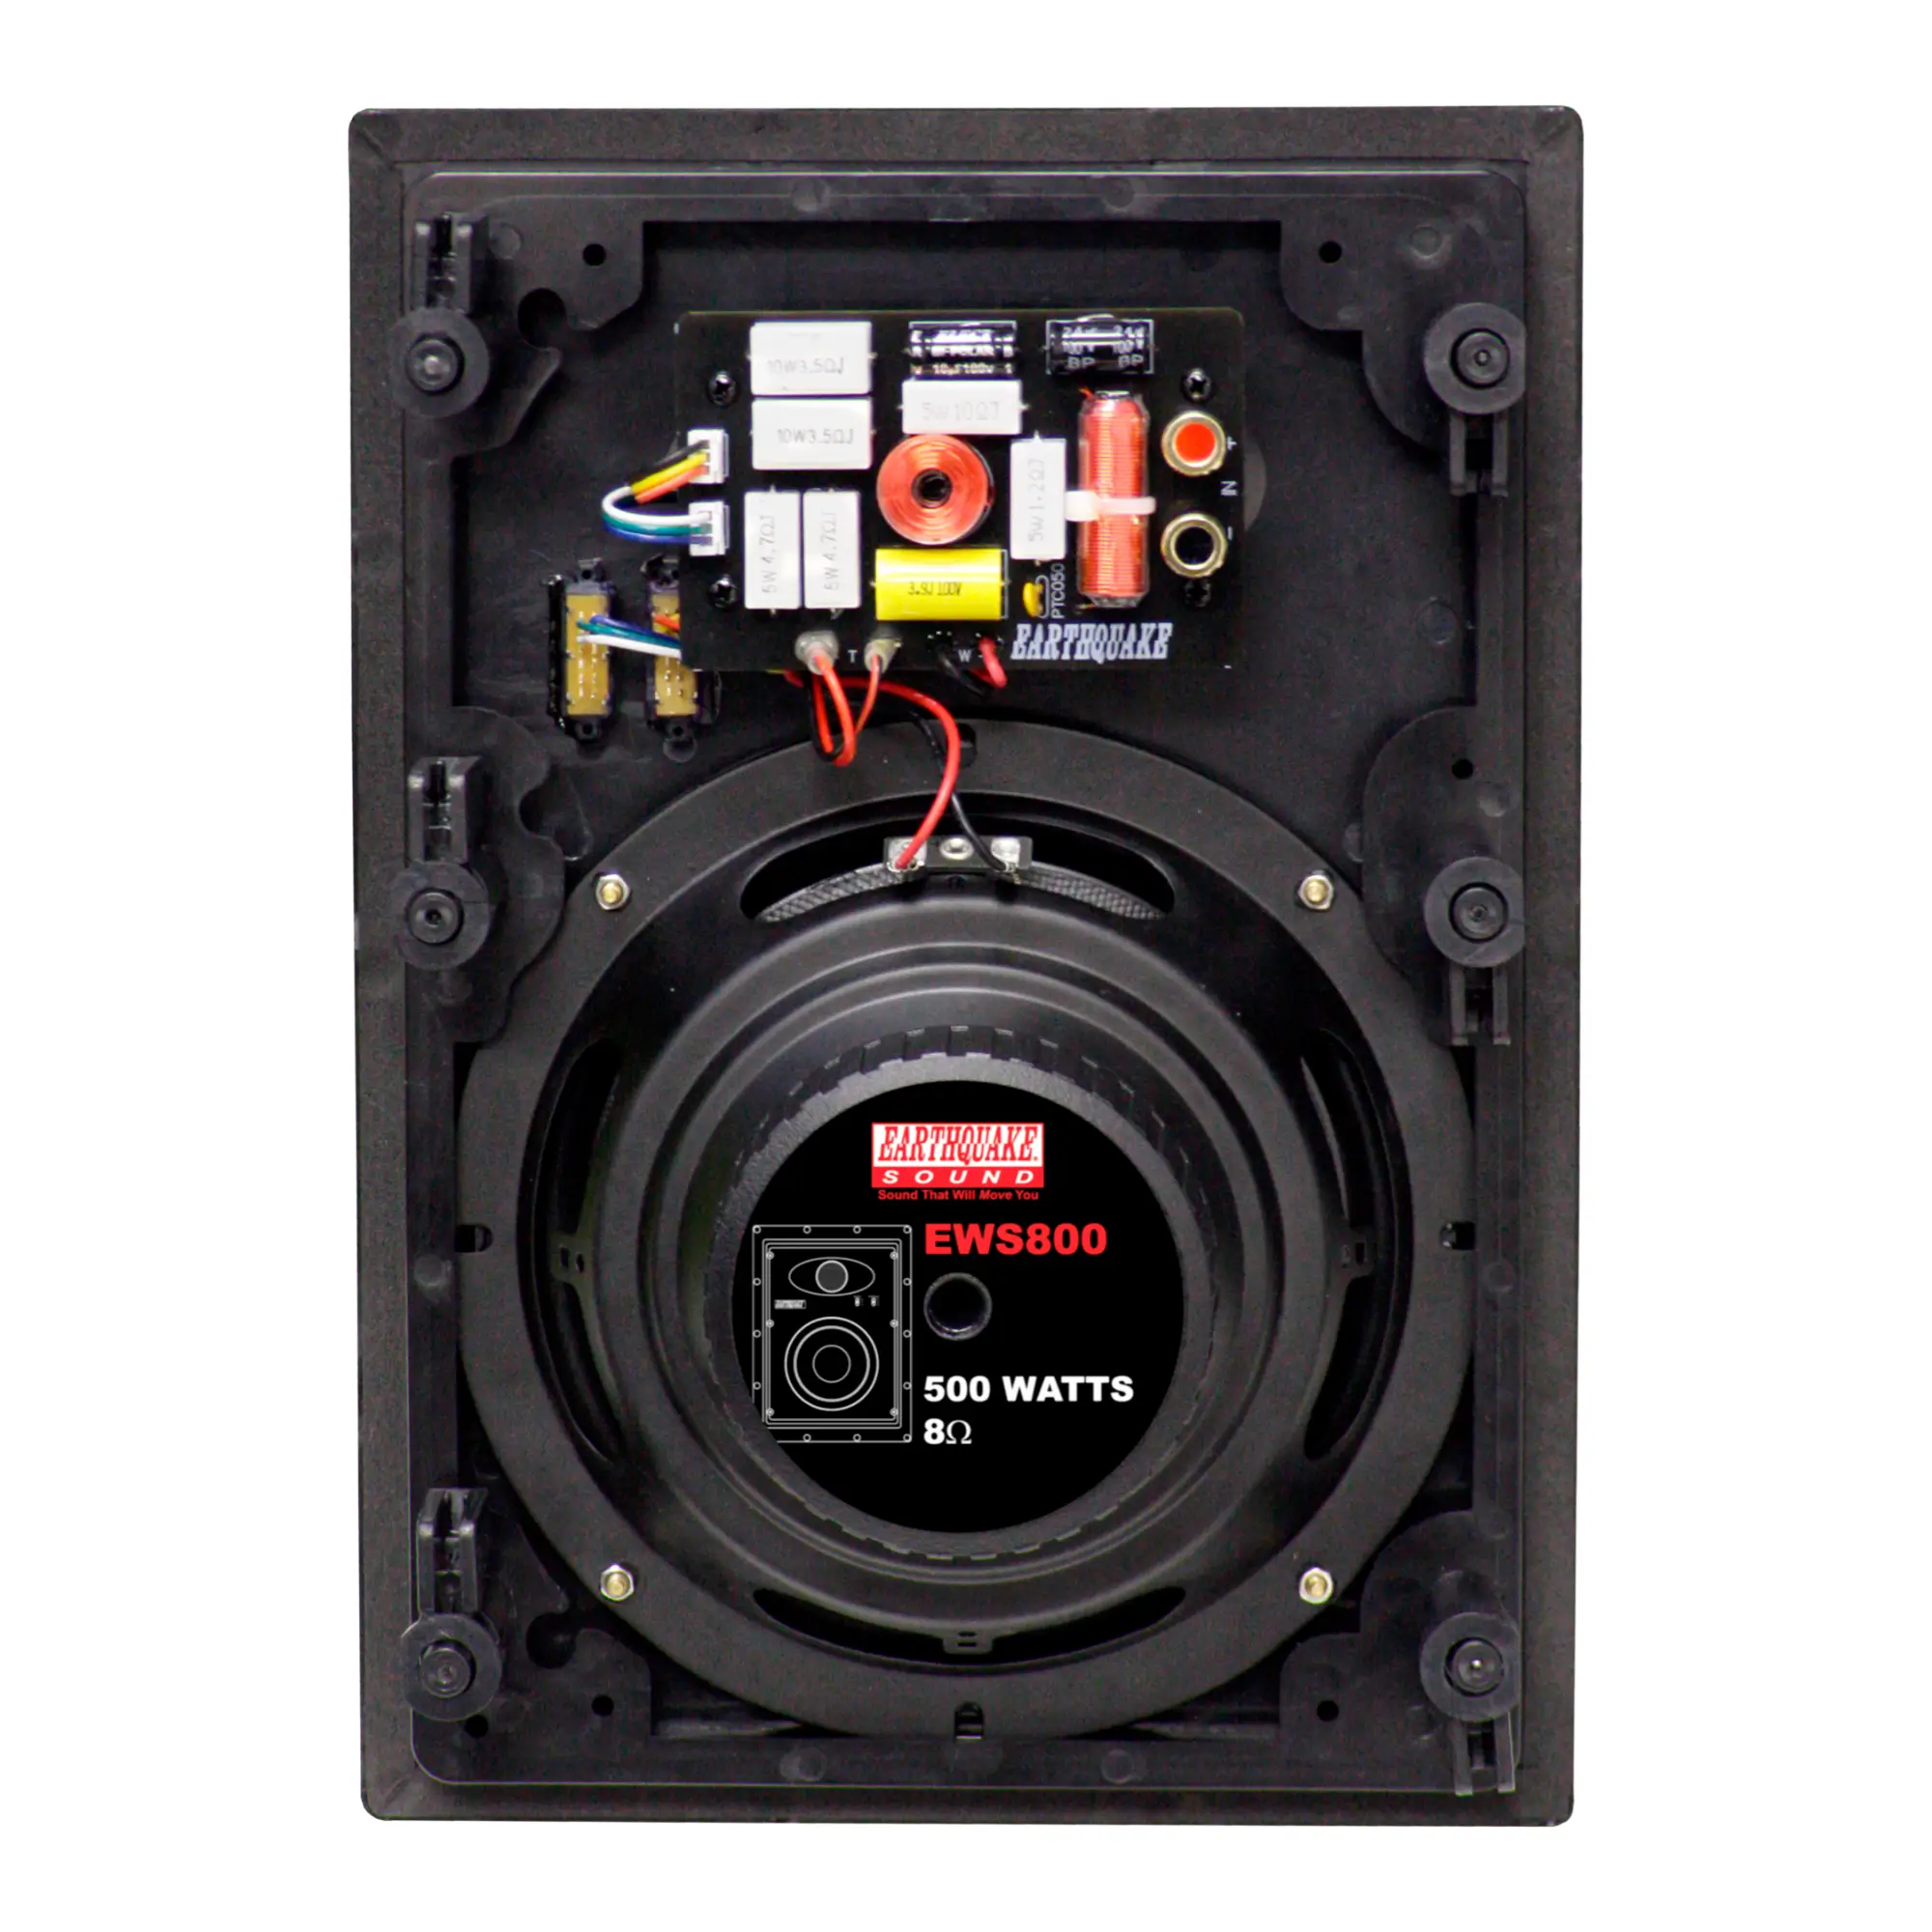 Rear view of the Earthquake 2-Way EWS800 Edgeless In-Wall Speaker.